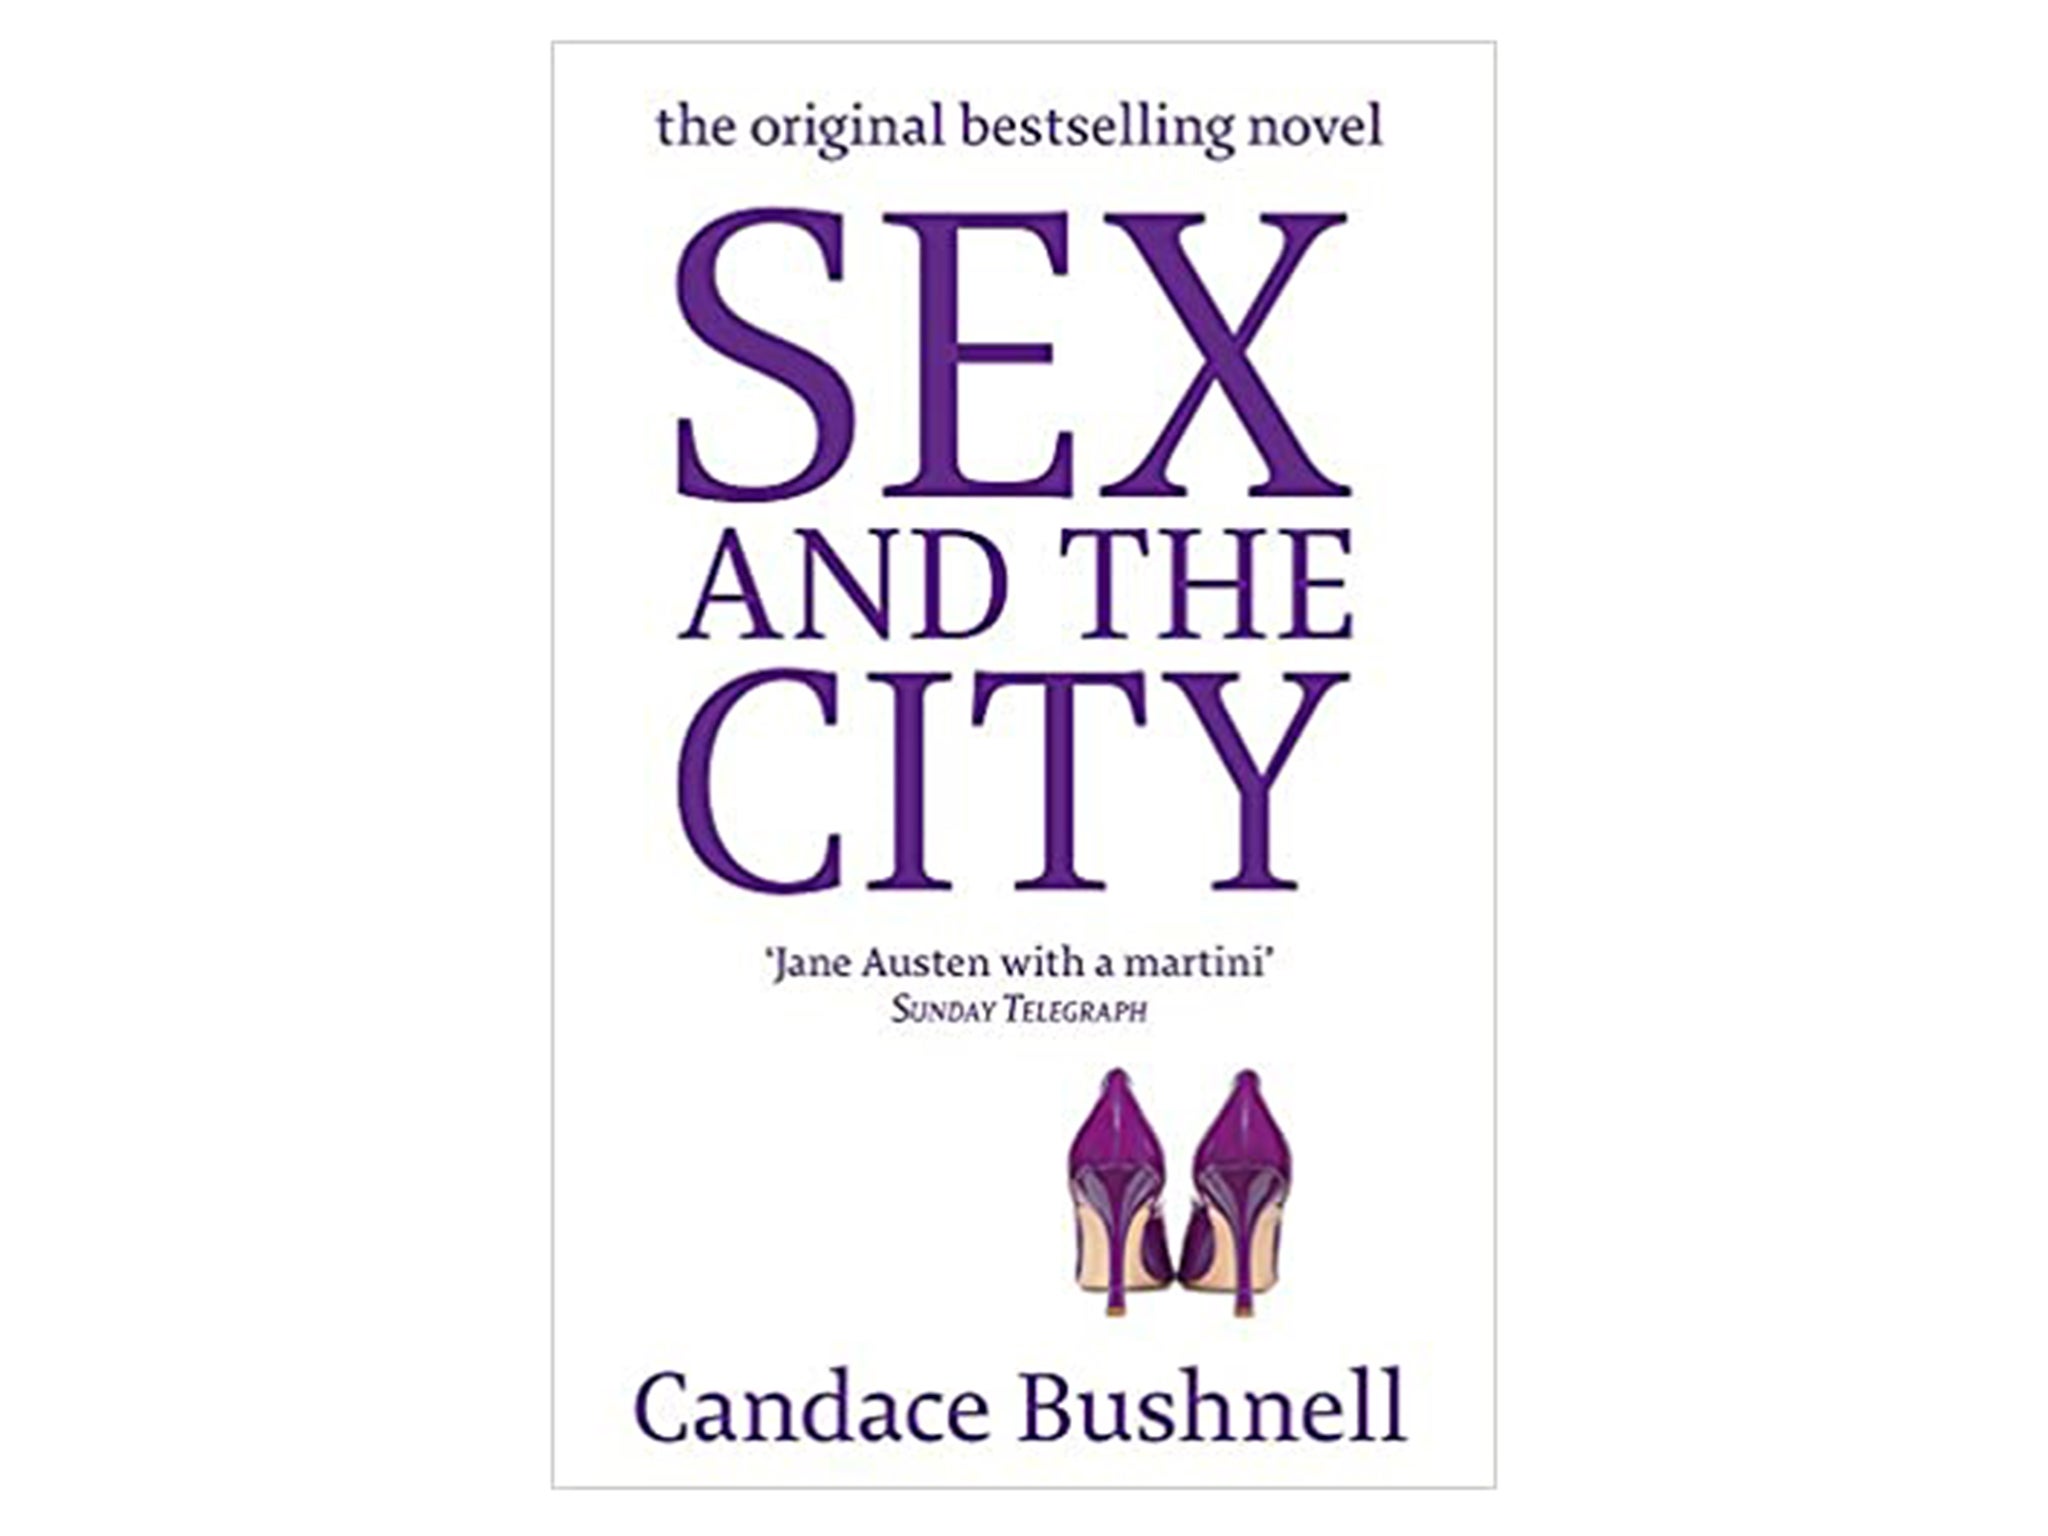 sex-and-the-city-book-candace-bushnell-indybest.jpg